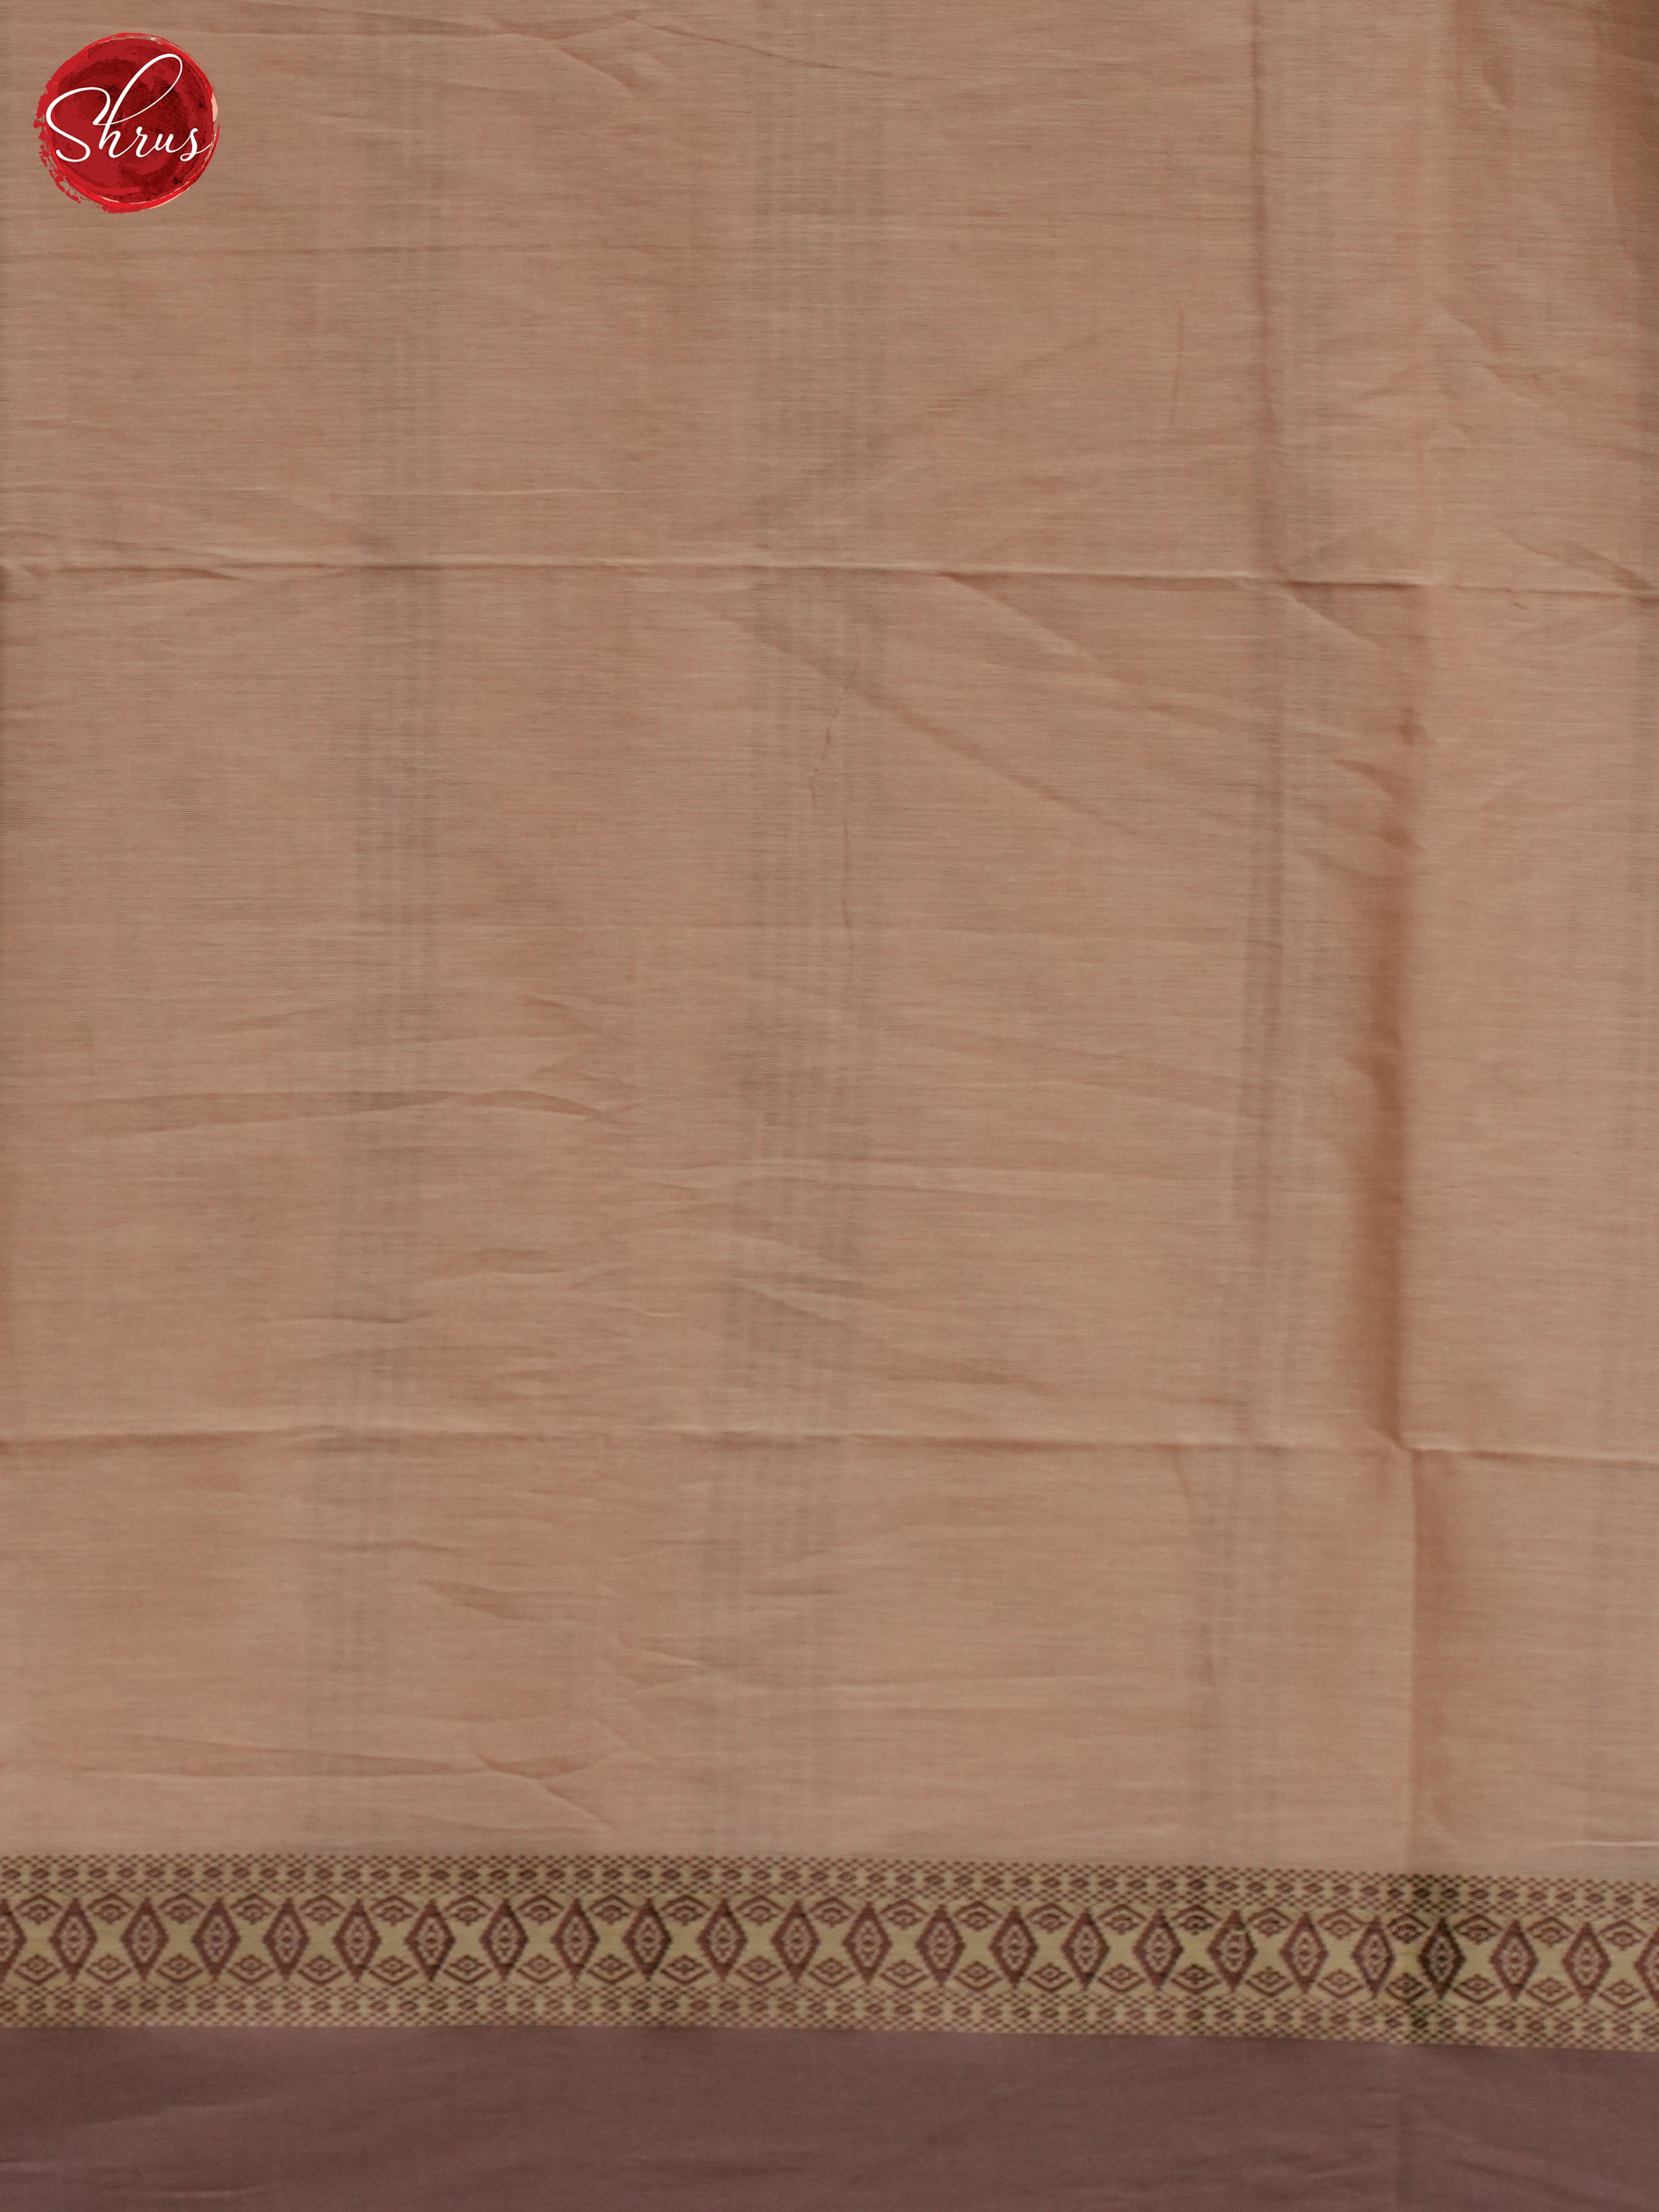 Dusty Brown & Brown - Bengal cotton Saree - Shop on ShrusEternity.com